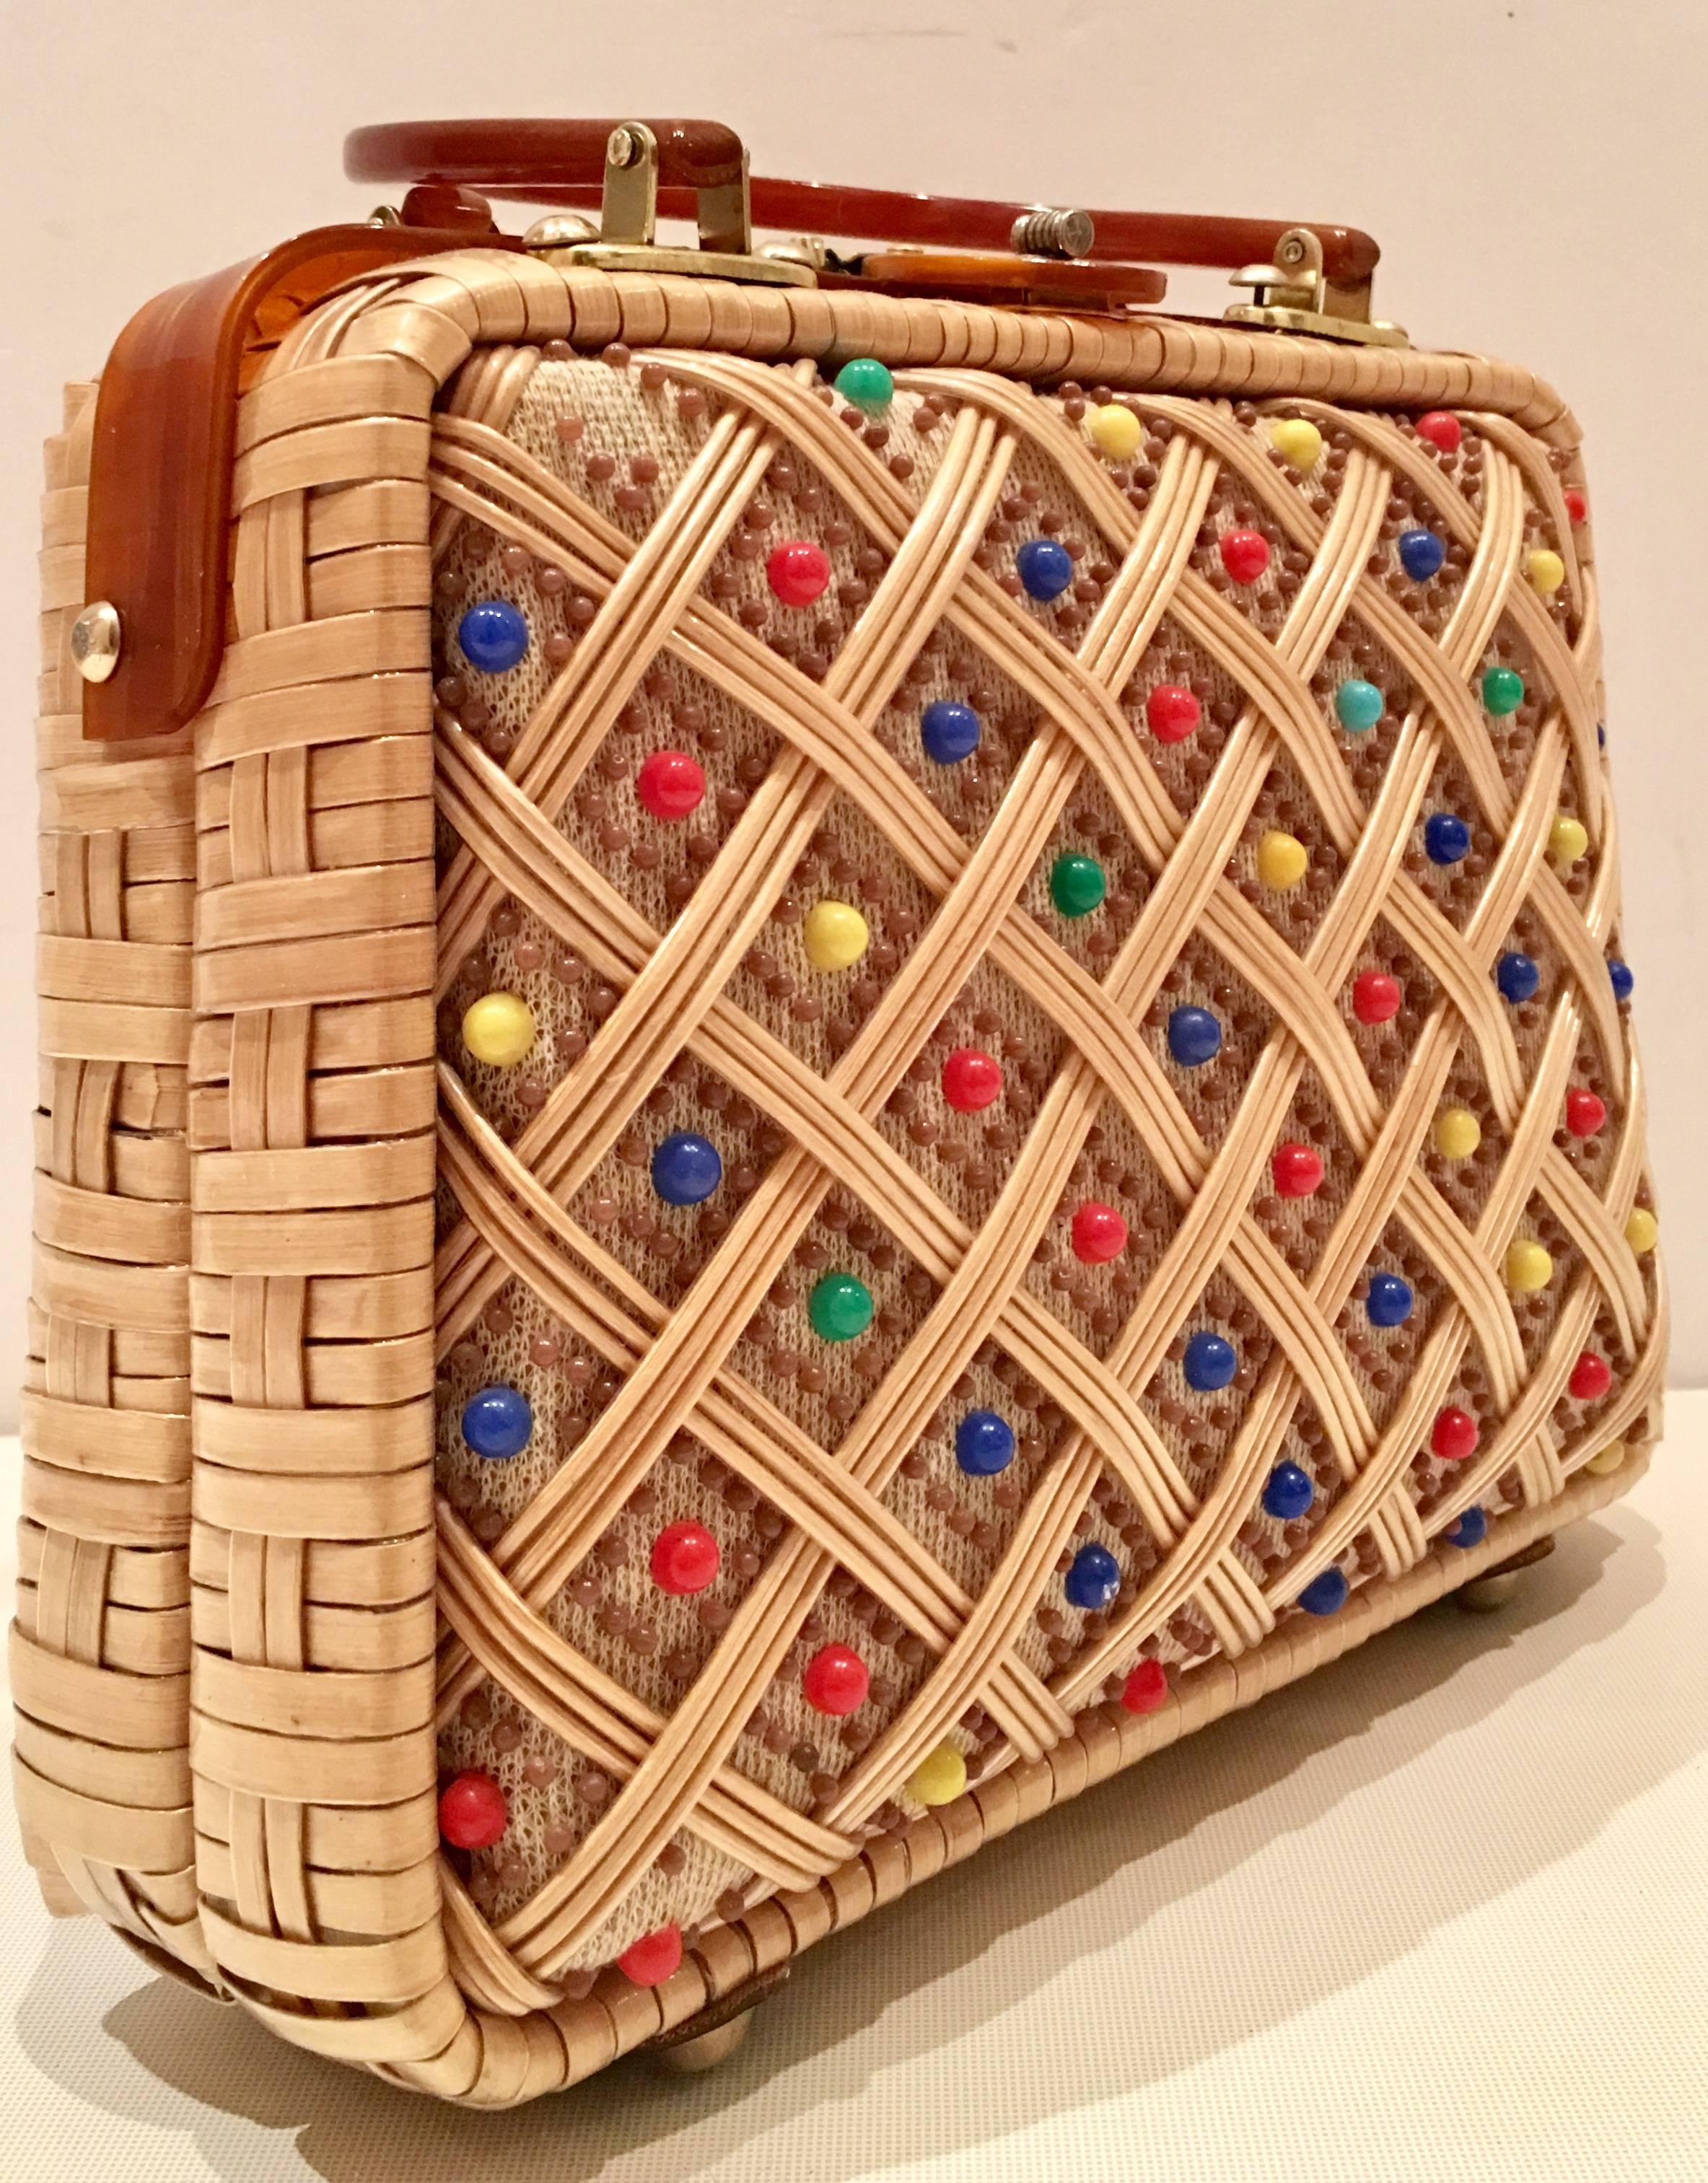 1960'S Wicker and Lucite tortoise dyed lattice handbag. This made in Hong Kong hand bag features, raised resin beads in primary colors and brass hardware detail.
Fully lined in peach colored vinyl and features two interior pockets, one with a zipper